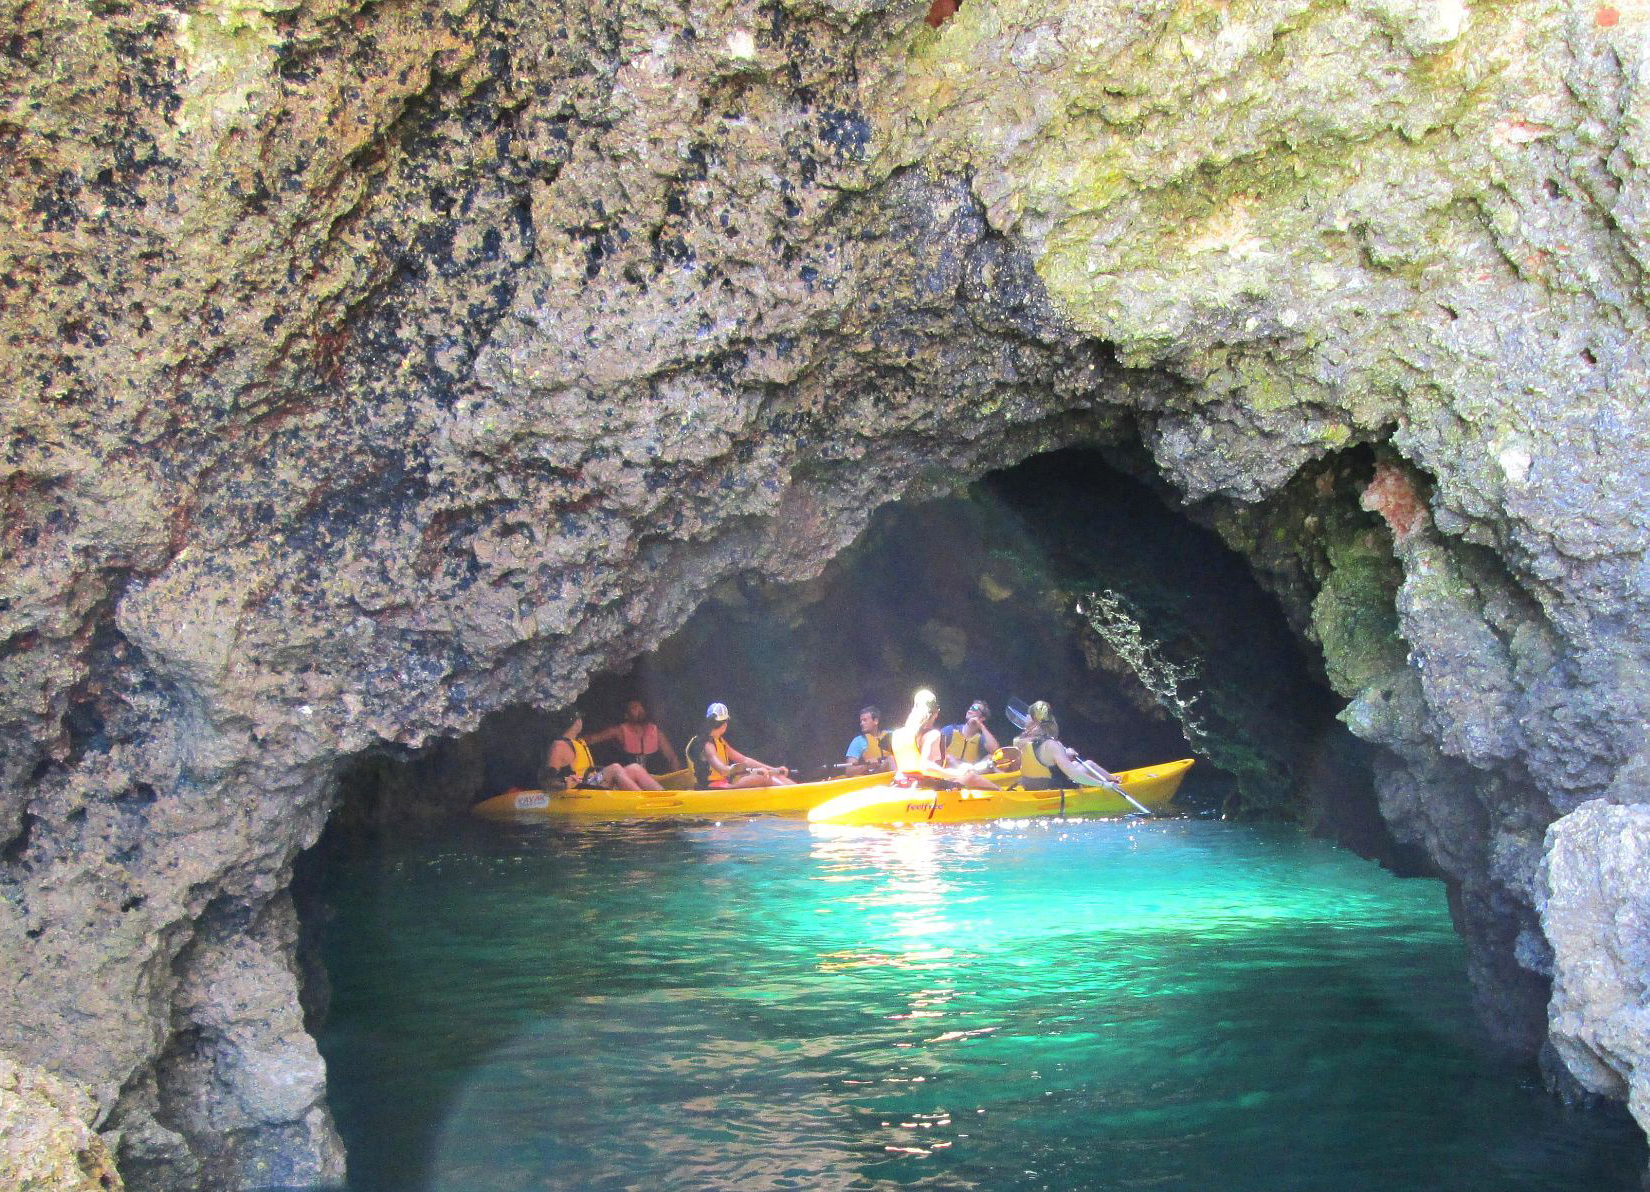 Enter the caves by kayak